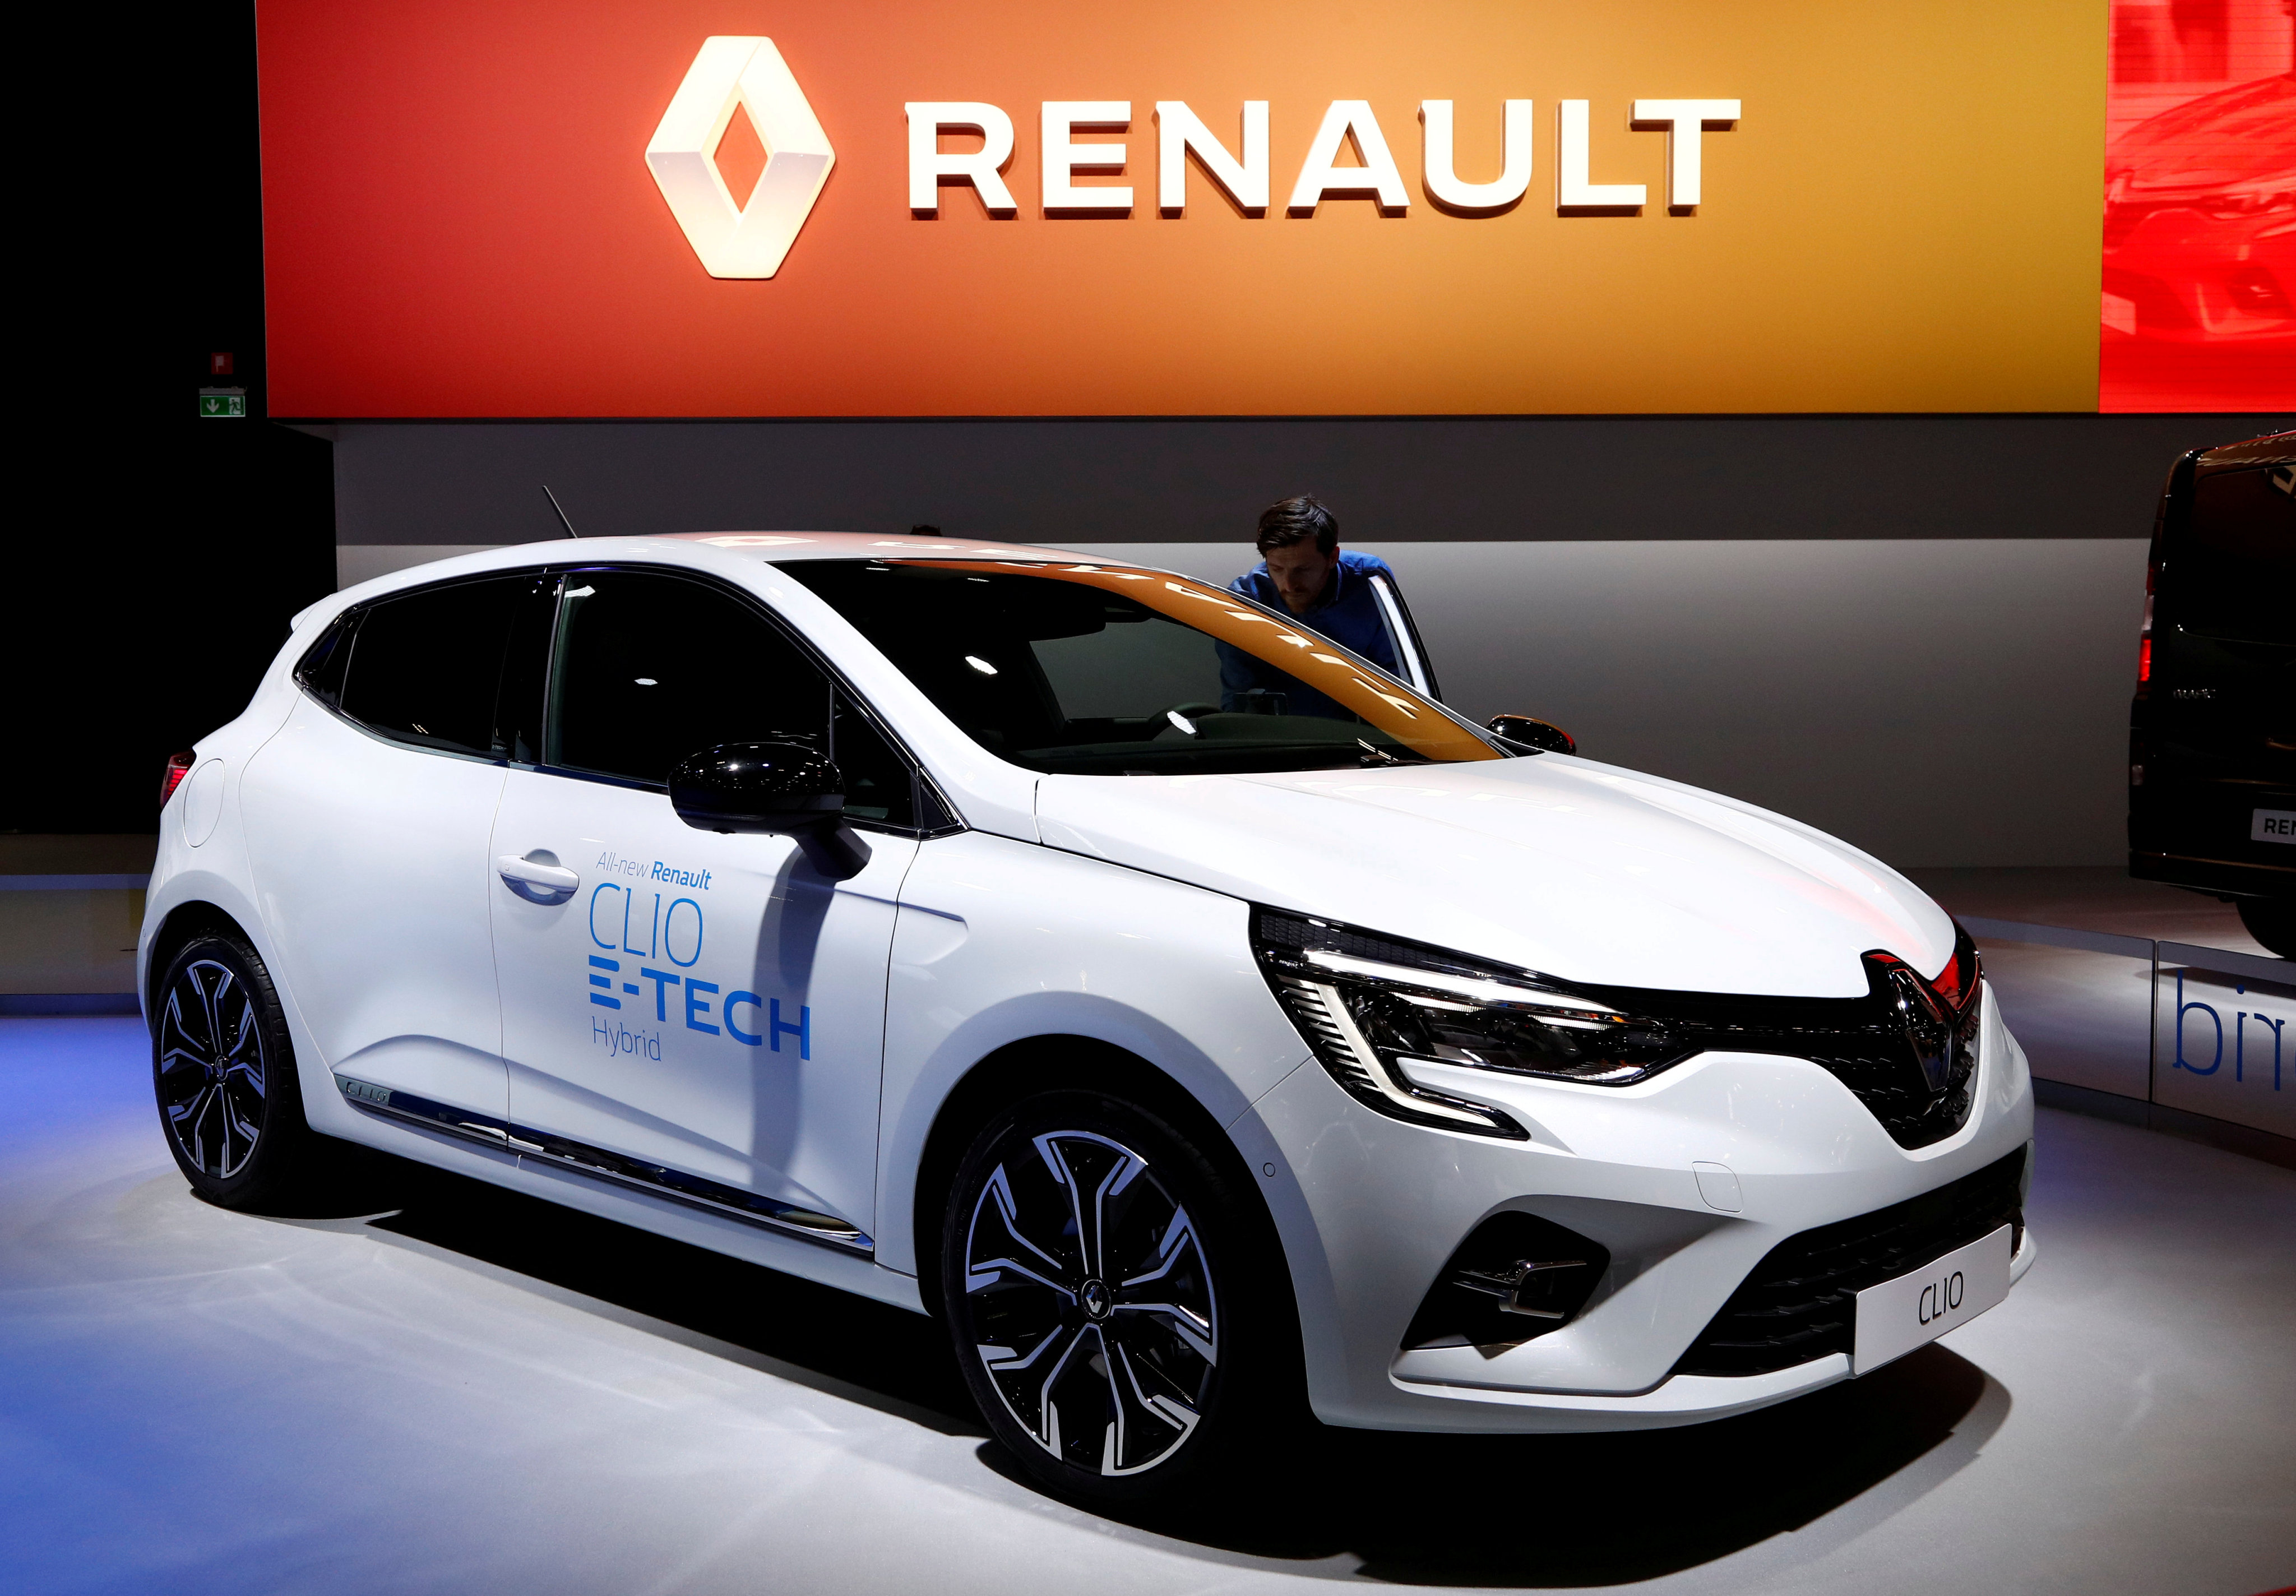 A Renault hybrid car is displayed at the Brussels Motor Show in this file photo from January 2020. The French carmaker is making renewed efforts to gain a foothold in China after signing an agreement with Geely to share resources and technologies and focus on making hybrid vehicles for Asian markets. Photo: Reuters